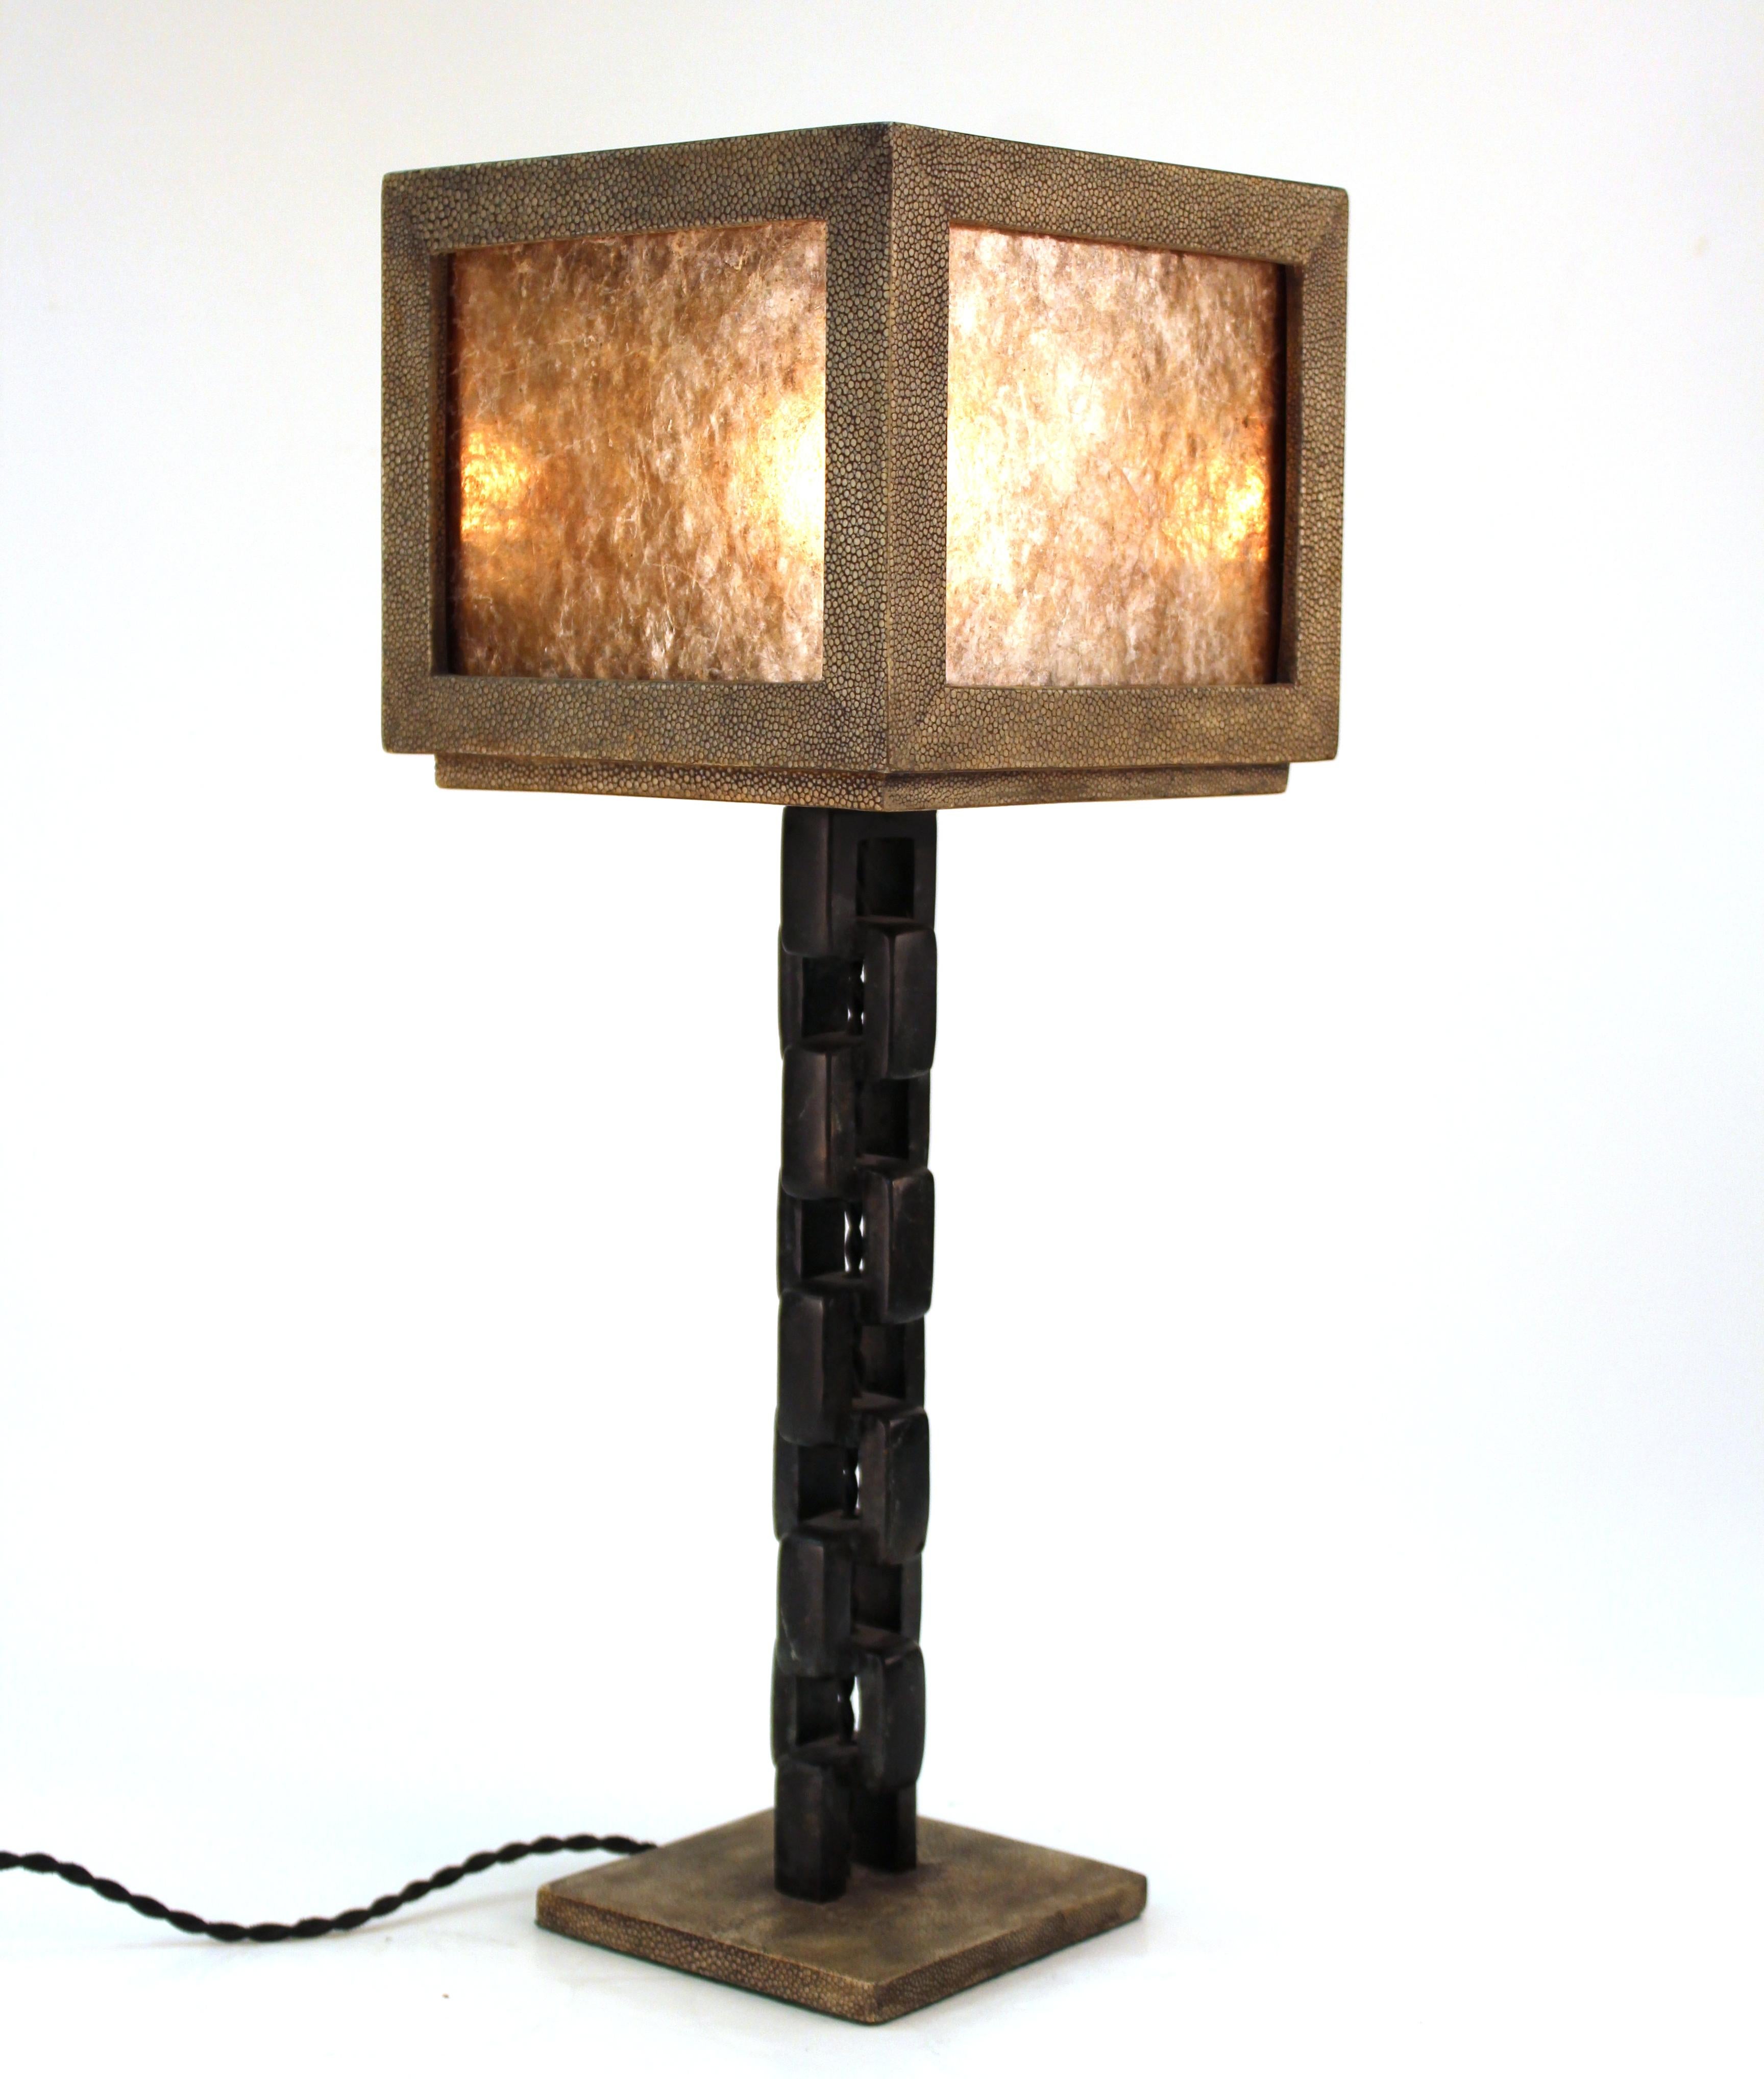 Italian modernist table lamp with an iron chain link leg atop a shagreen base, holding up a square shagreen light source. The piece dates from the 1960s and was made in Italy. In great vintage condition.